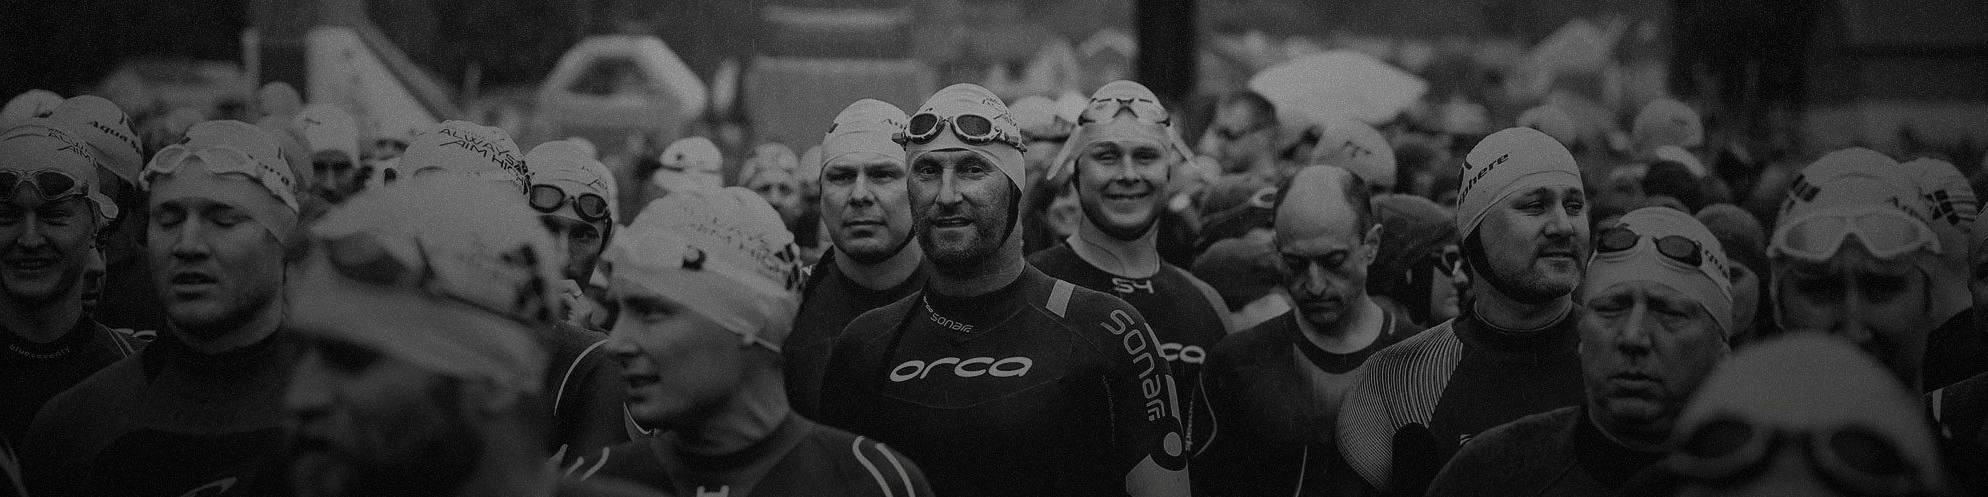 Hero image for Always Aim High Events - triathletes in Wales